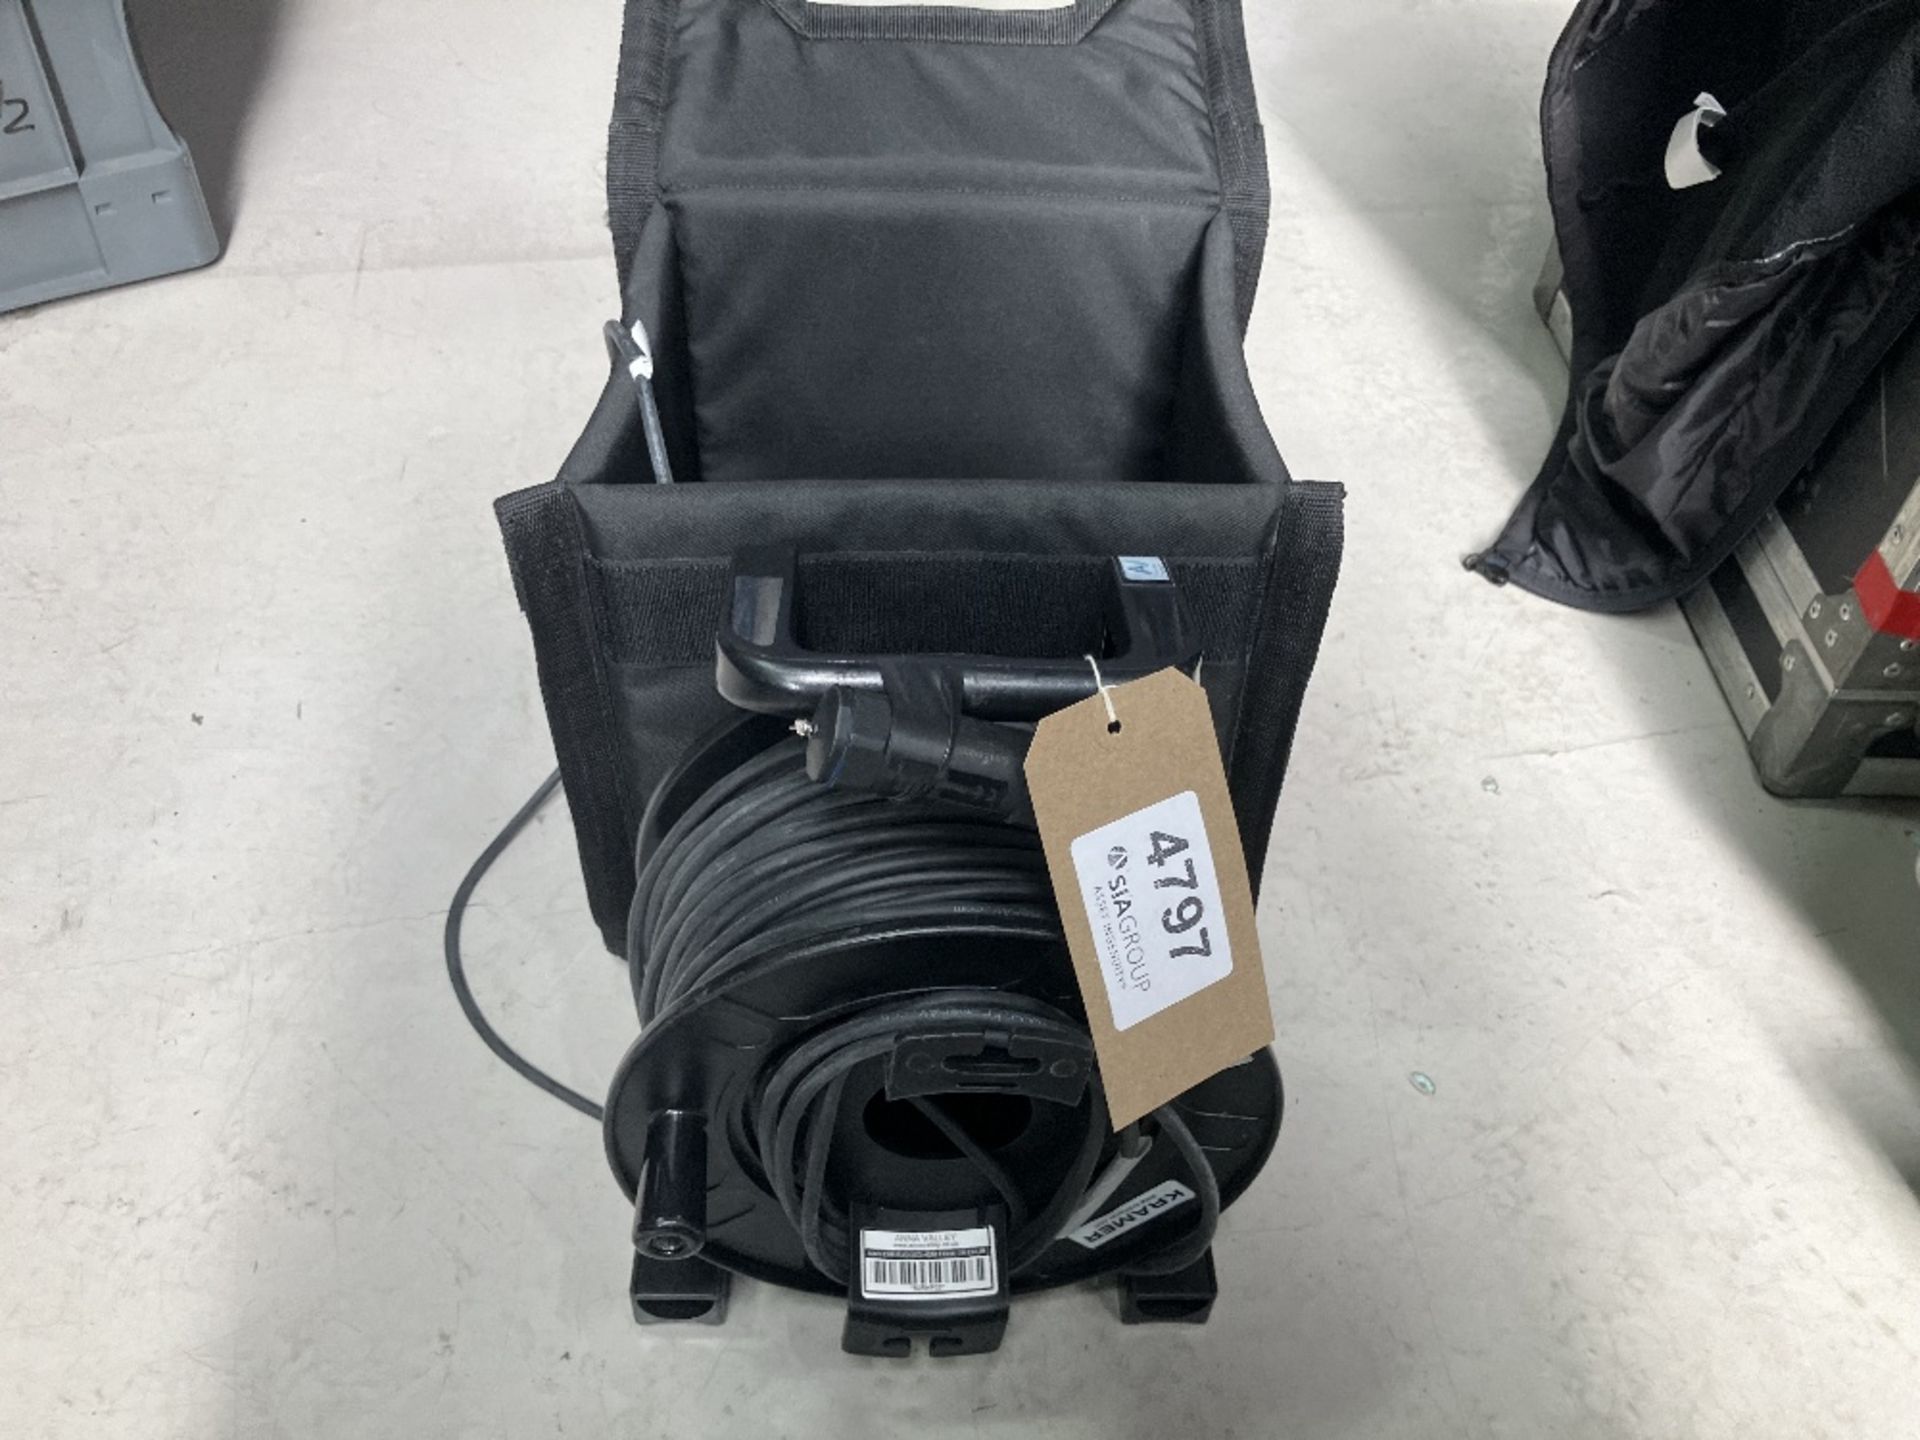 50m Rigid HDMI Fibre Cable Reel With Carry Bag - Image 4 of 8